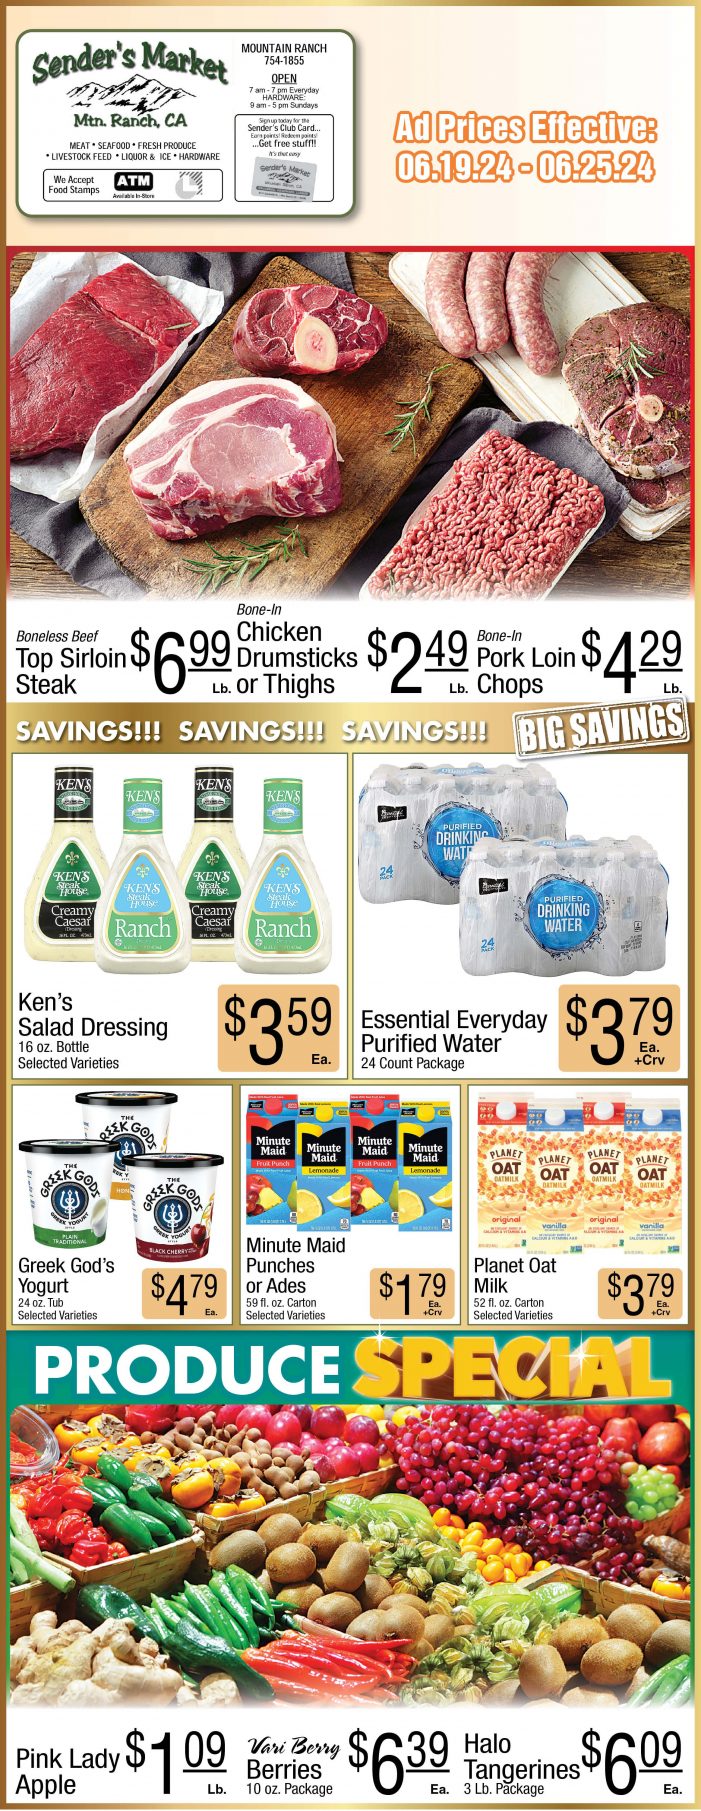 Sender’s Market Weekly Ad & Grocery Specials Through June 25th! Shop Local & Save!!